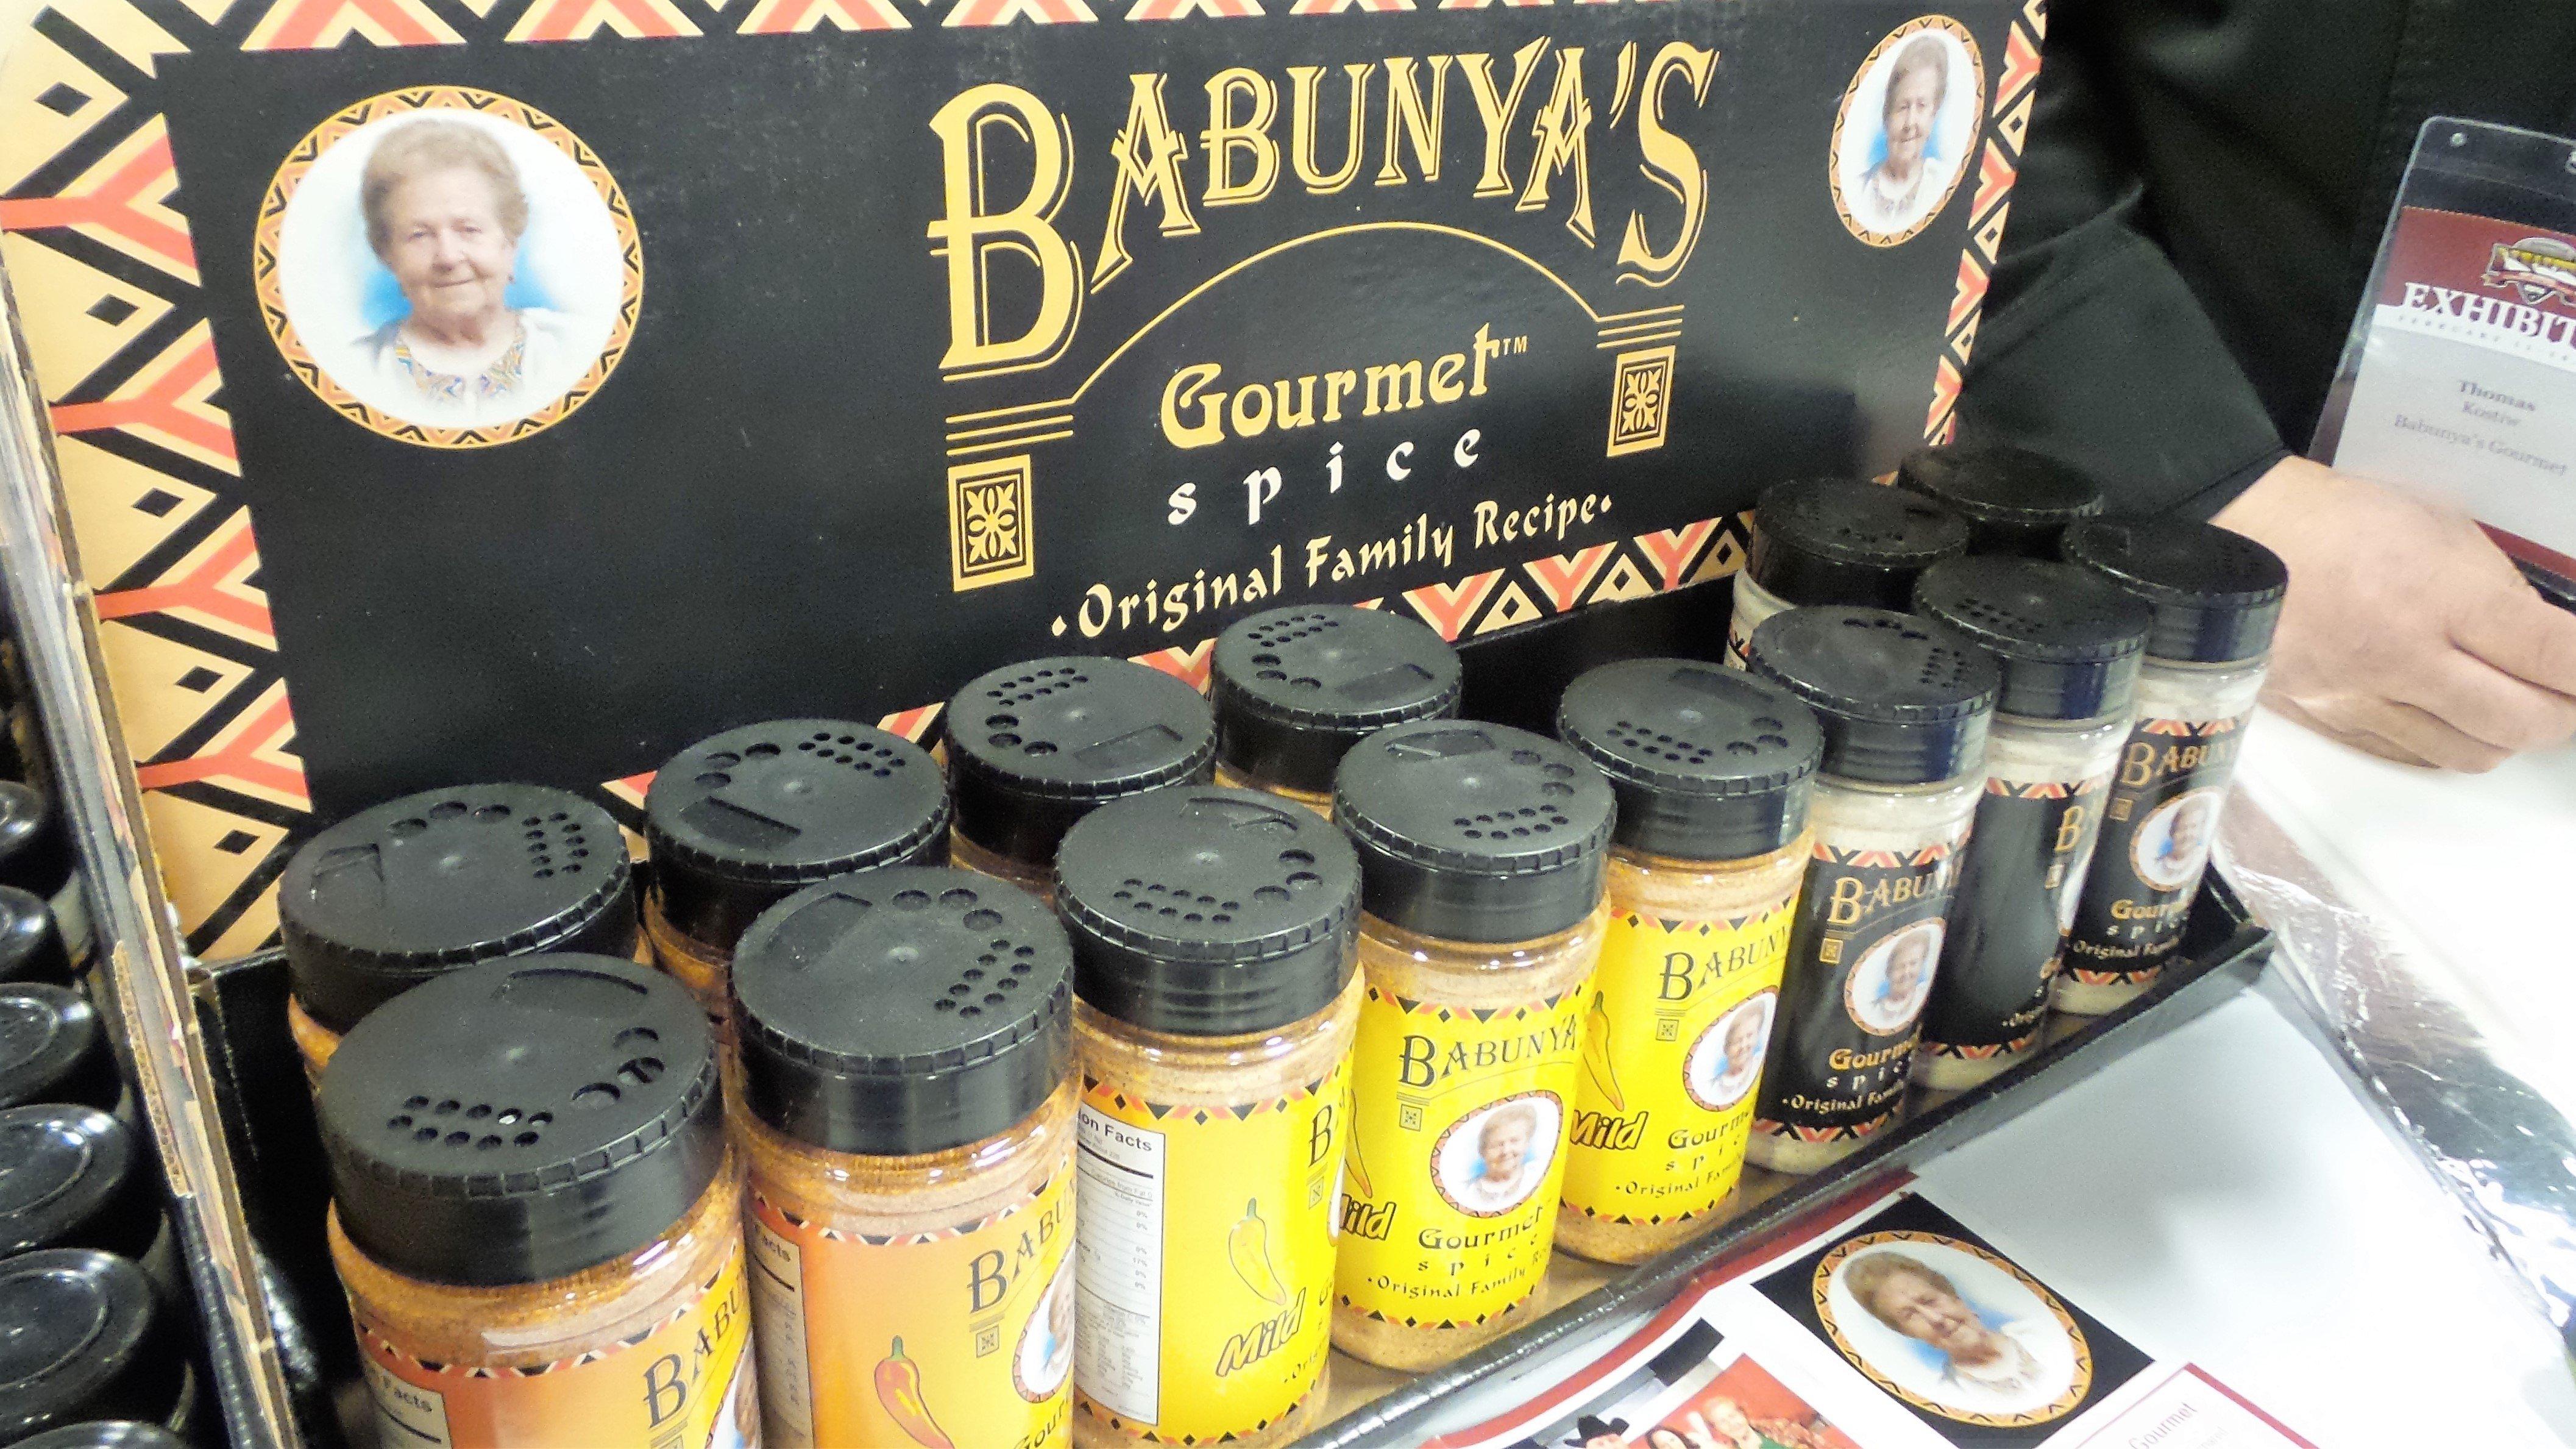 Babunya's Gourmet Seasoning Blends come in both hot and mild and should compliment any wild game.